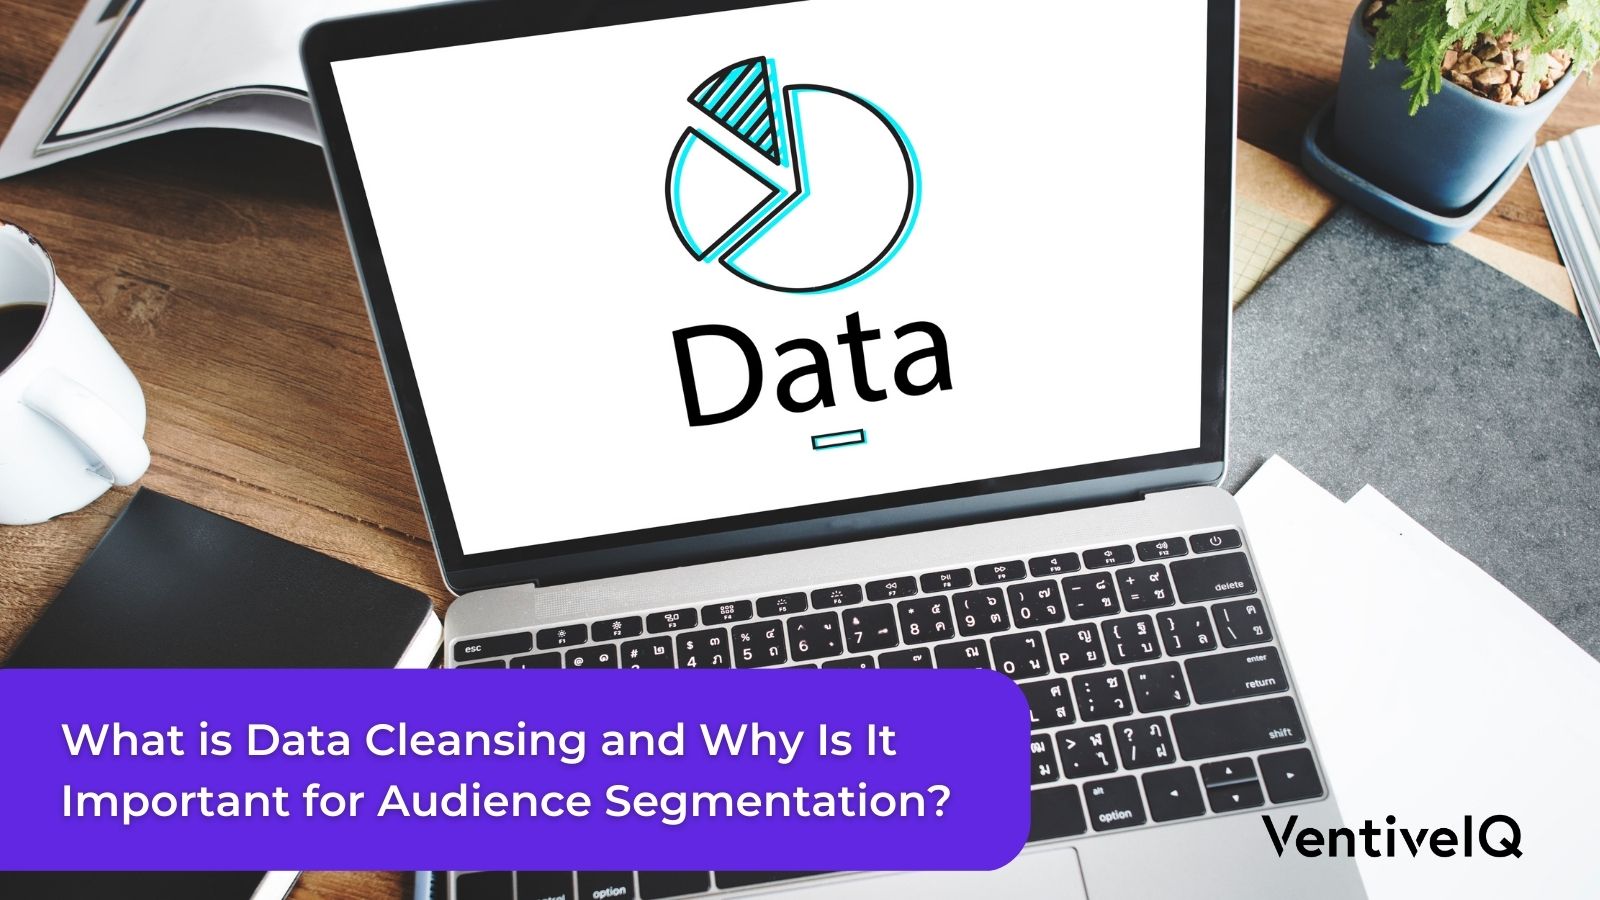 What is Data Cleansing and Why Is It Important for Audience Segmentation?